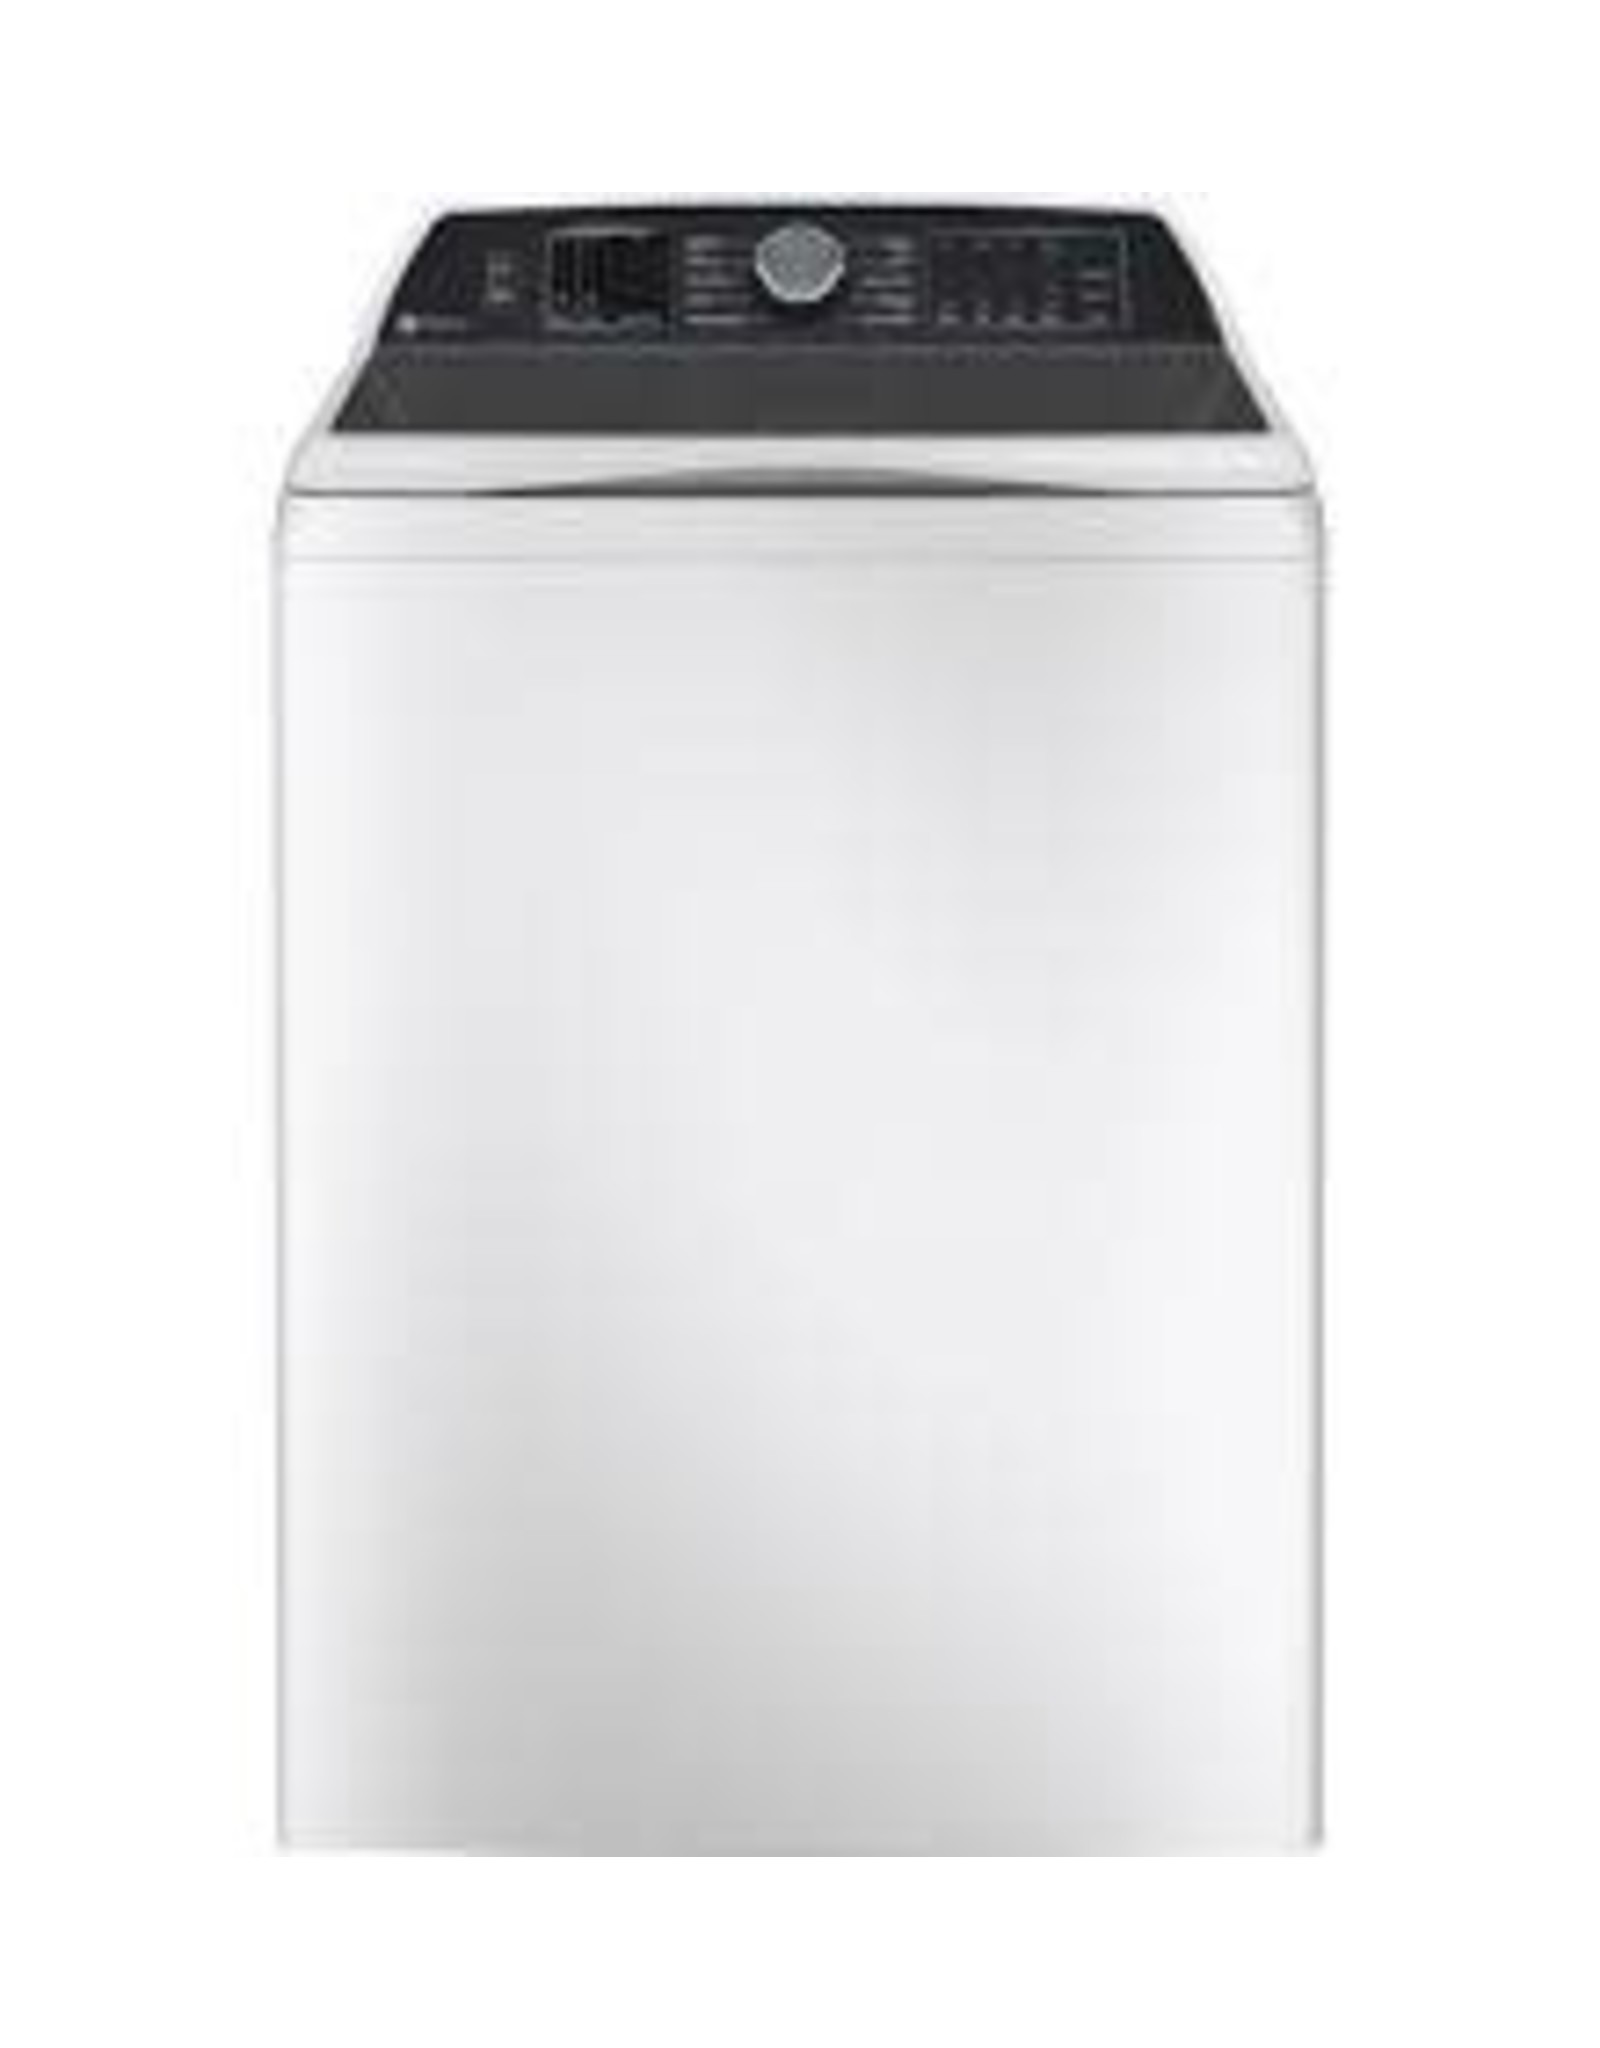 GE CK/ PTW705BSTWS Profile 5.3 cu. ft. High-Efficiency Smart Top Load Washer with Quiet Wash Dynamic Balancing Technology in White